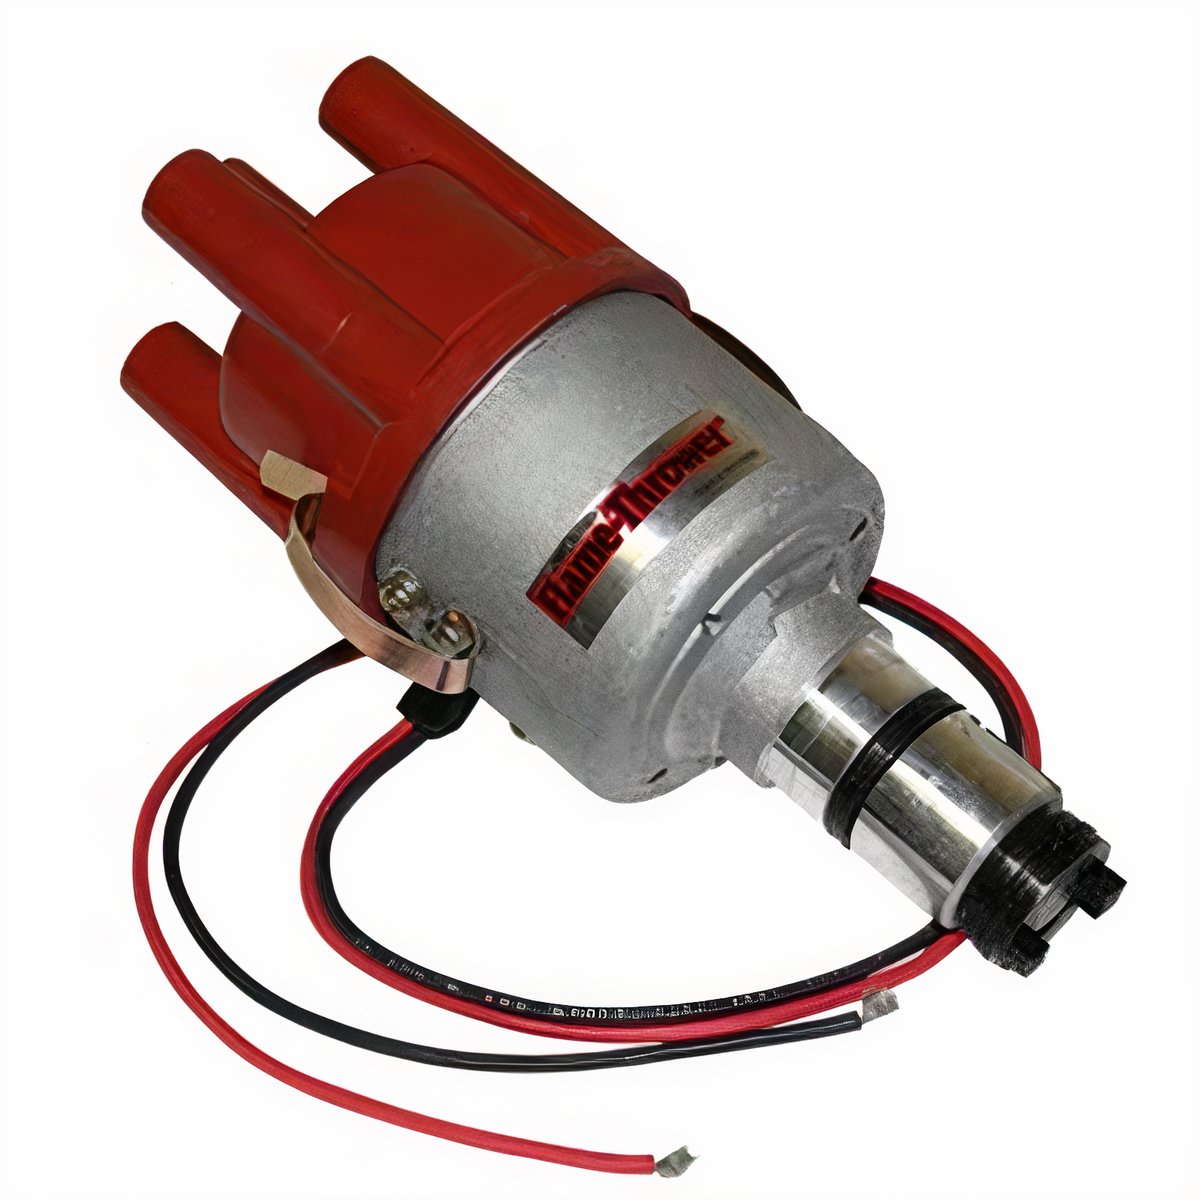 PerTronix Distributor with Ignitor 3 Ignition Module